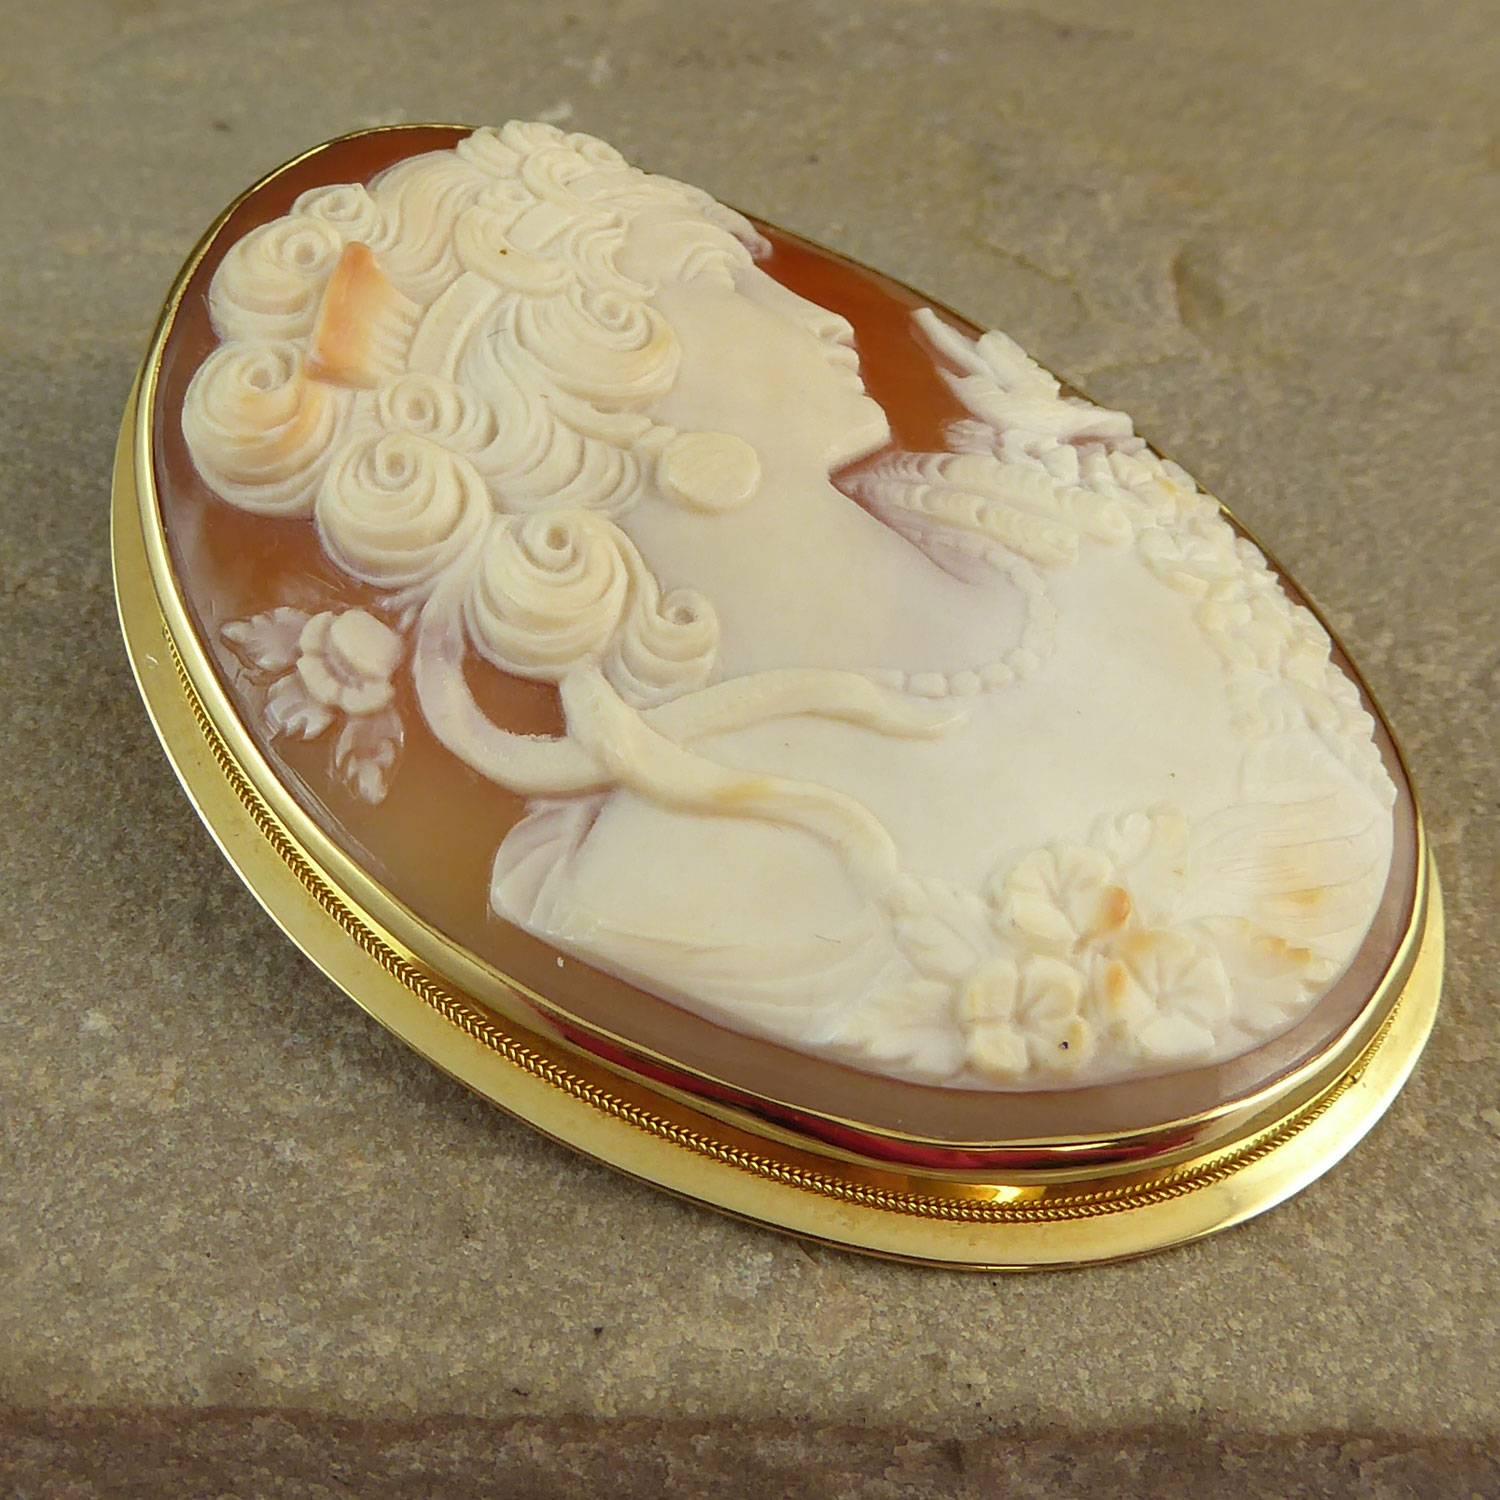 A beautifully carved vintage cameo of impressive size.  Expertly carved conch shell depicting a finely dressed and coiffured woman.  Her hairstyle is extremely ornate with curls around the face and tendrils escaping down the neck.  The  hairstyle is